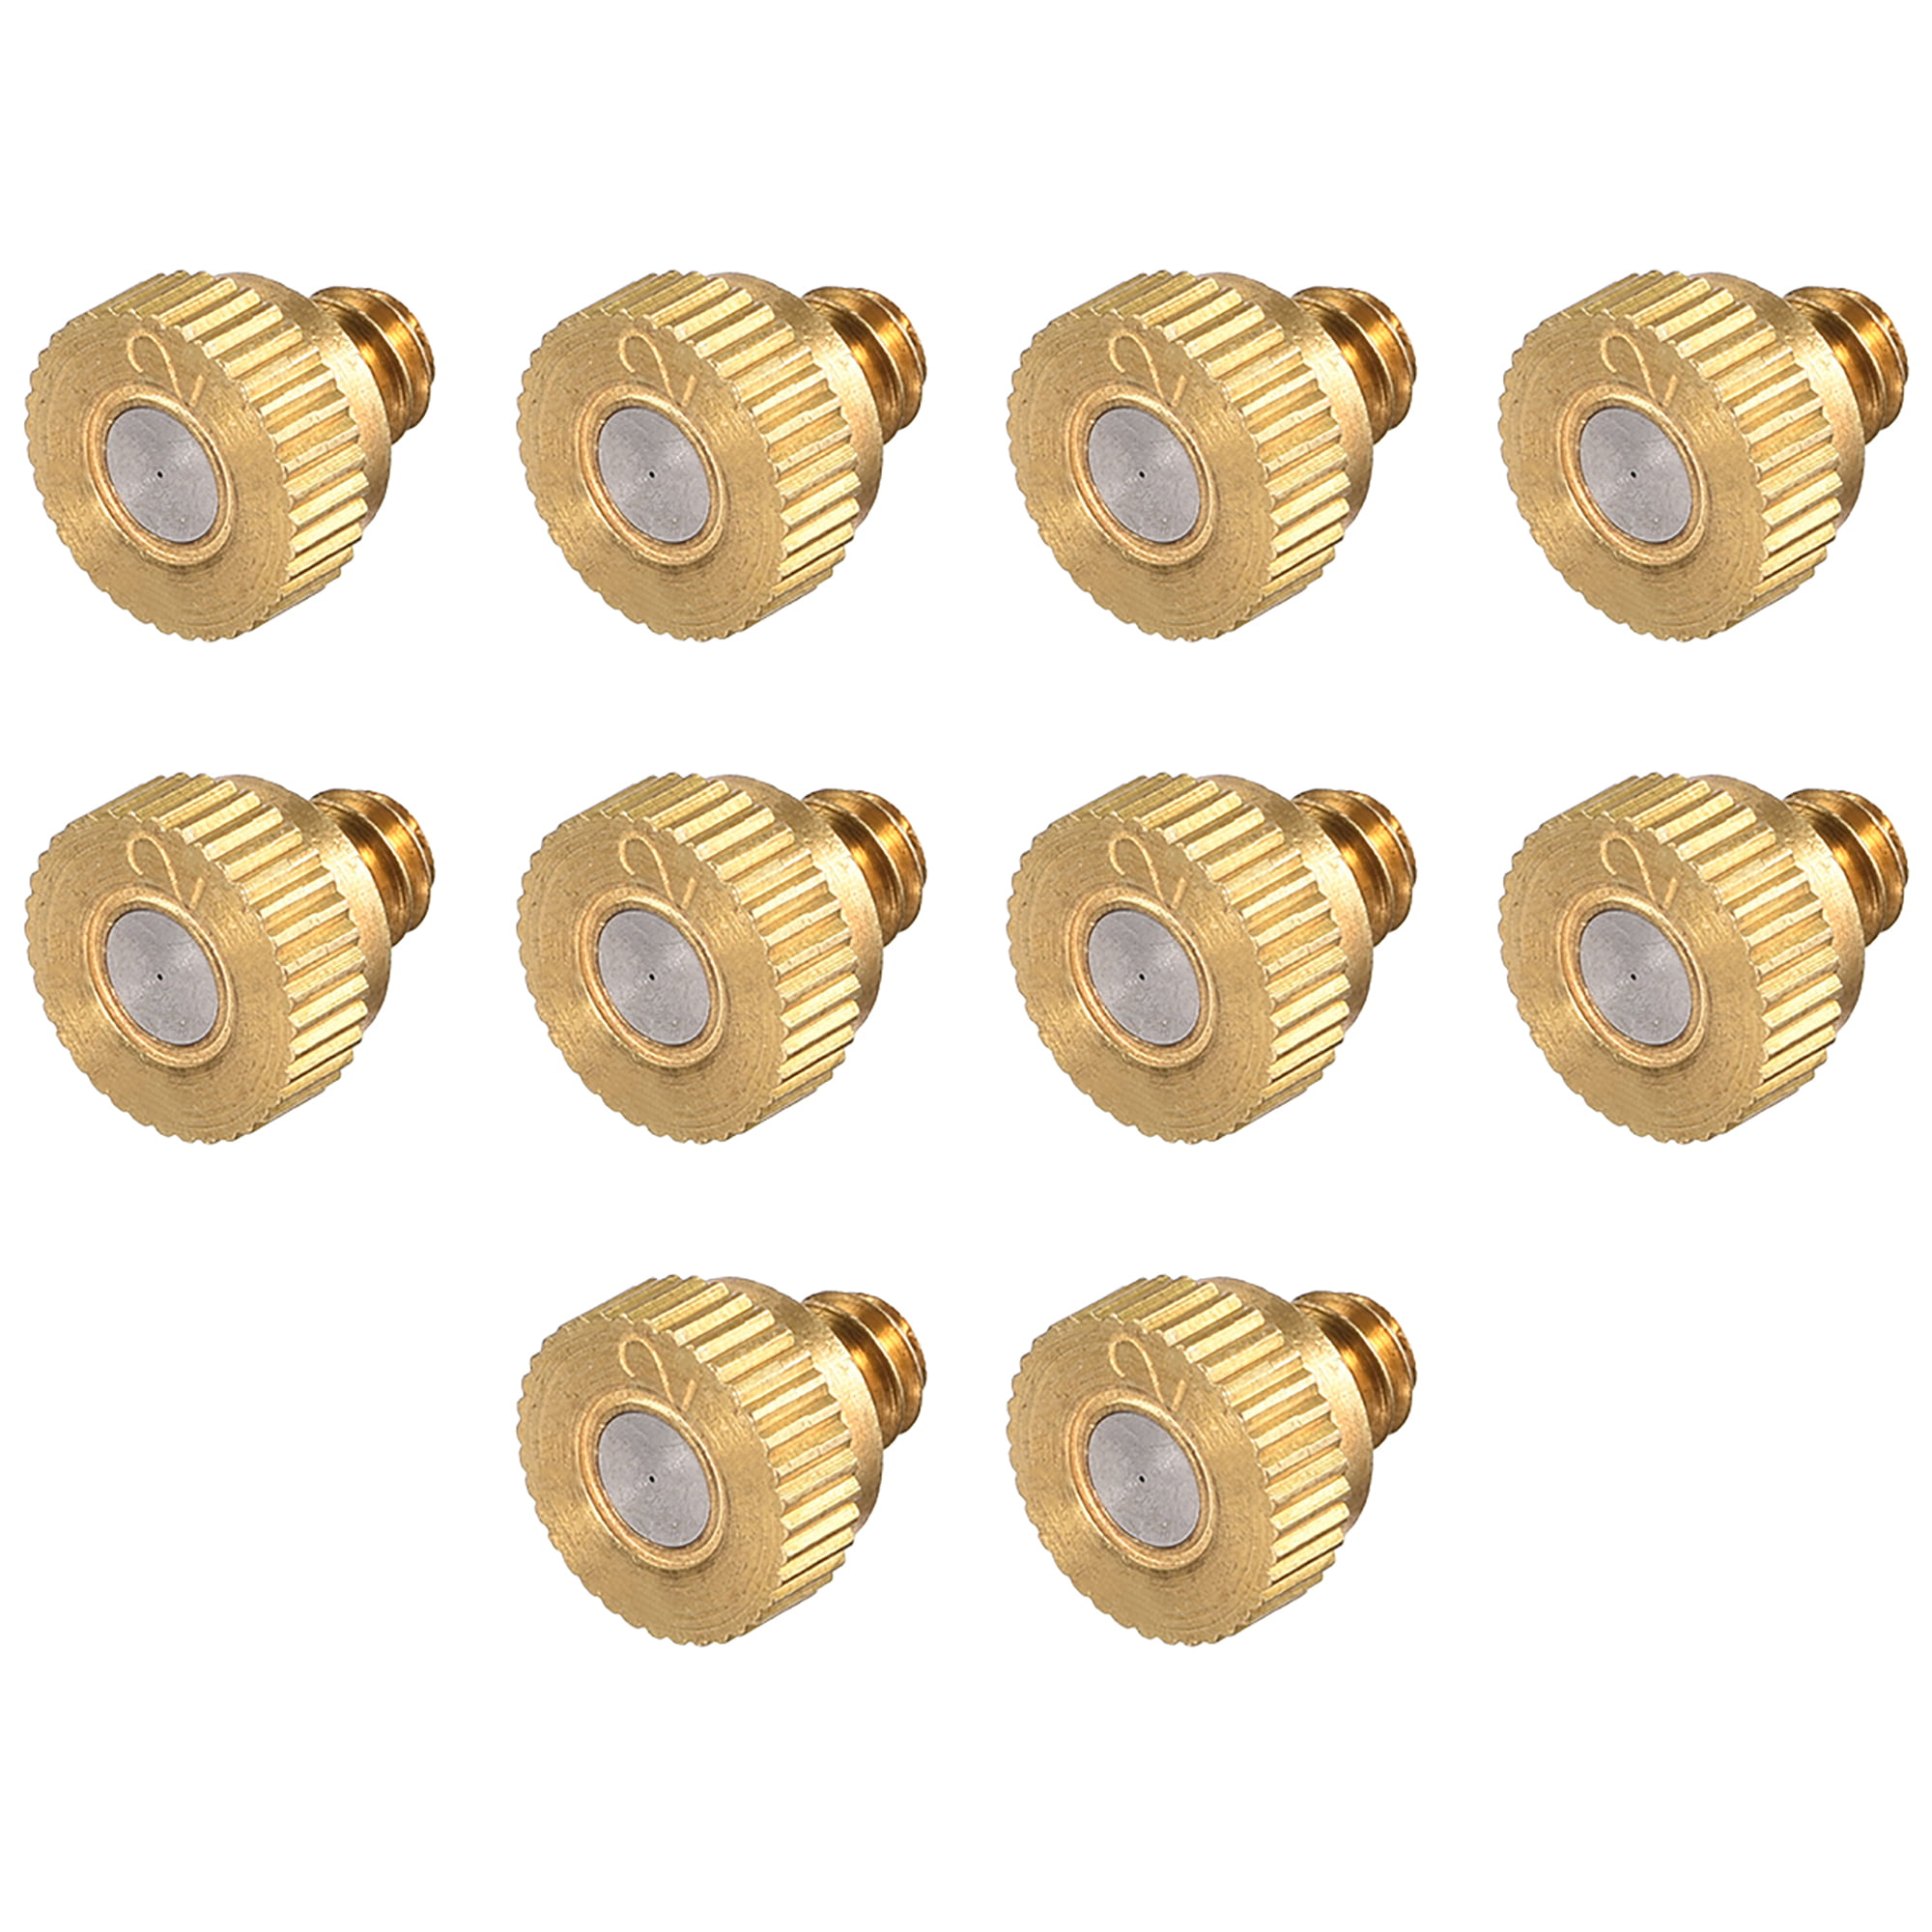 uxcell M14 Brass Single Hole Spray Sprinklers Misting Nozzle Irrigation Connector 4pcs 